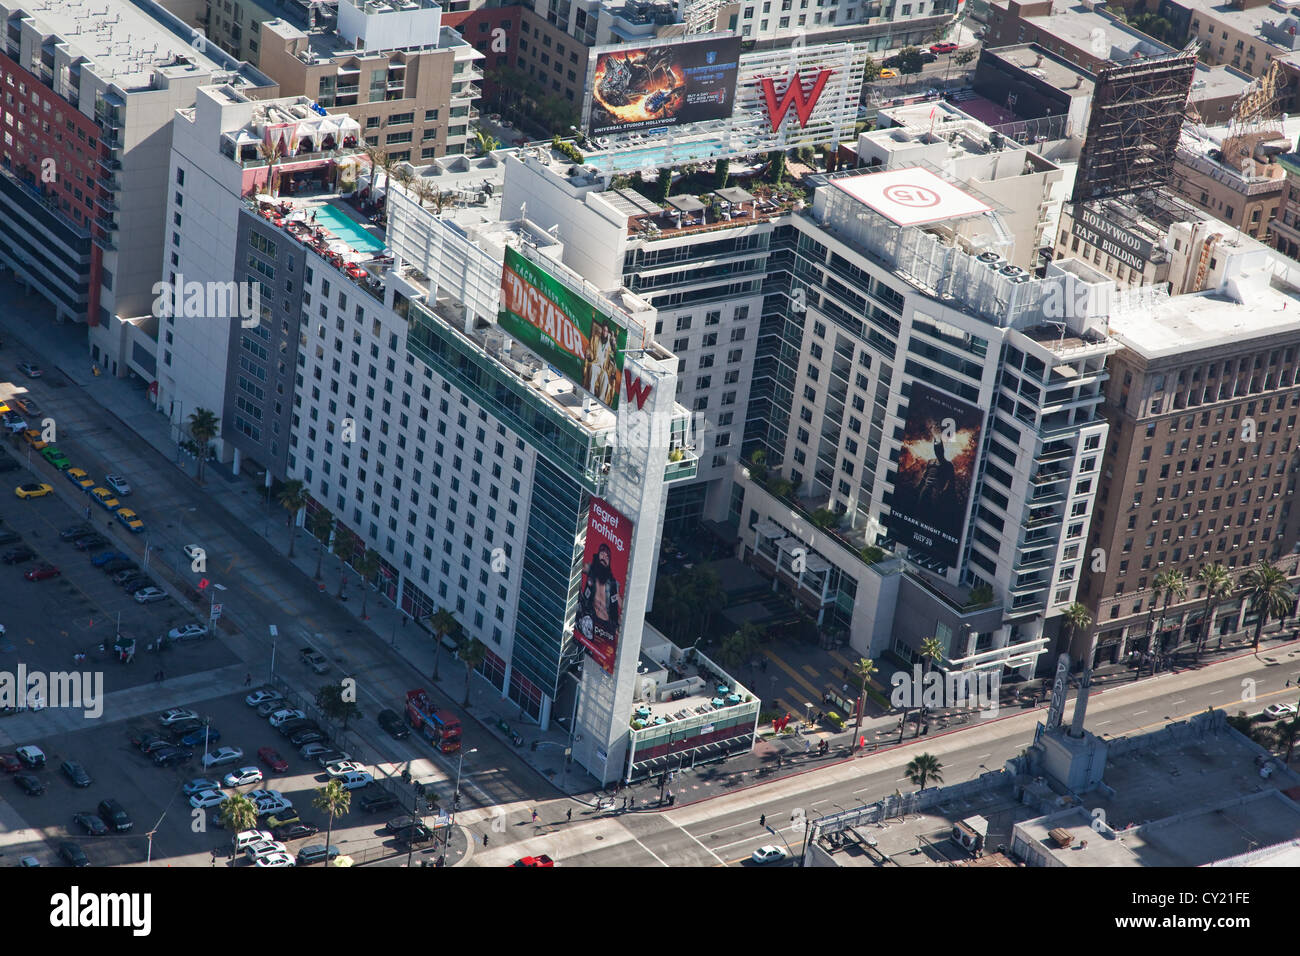 W Hotel on Hollywood Boulevarde's Walk of Fame. Stock Photo